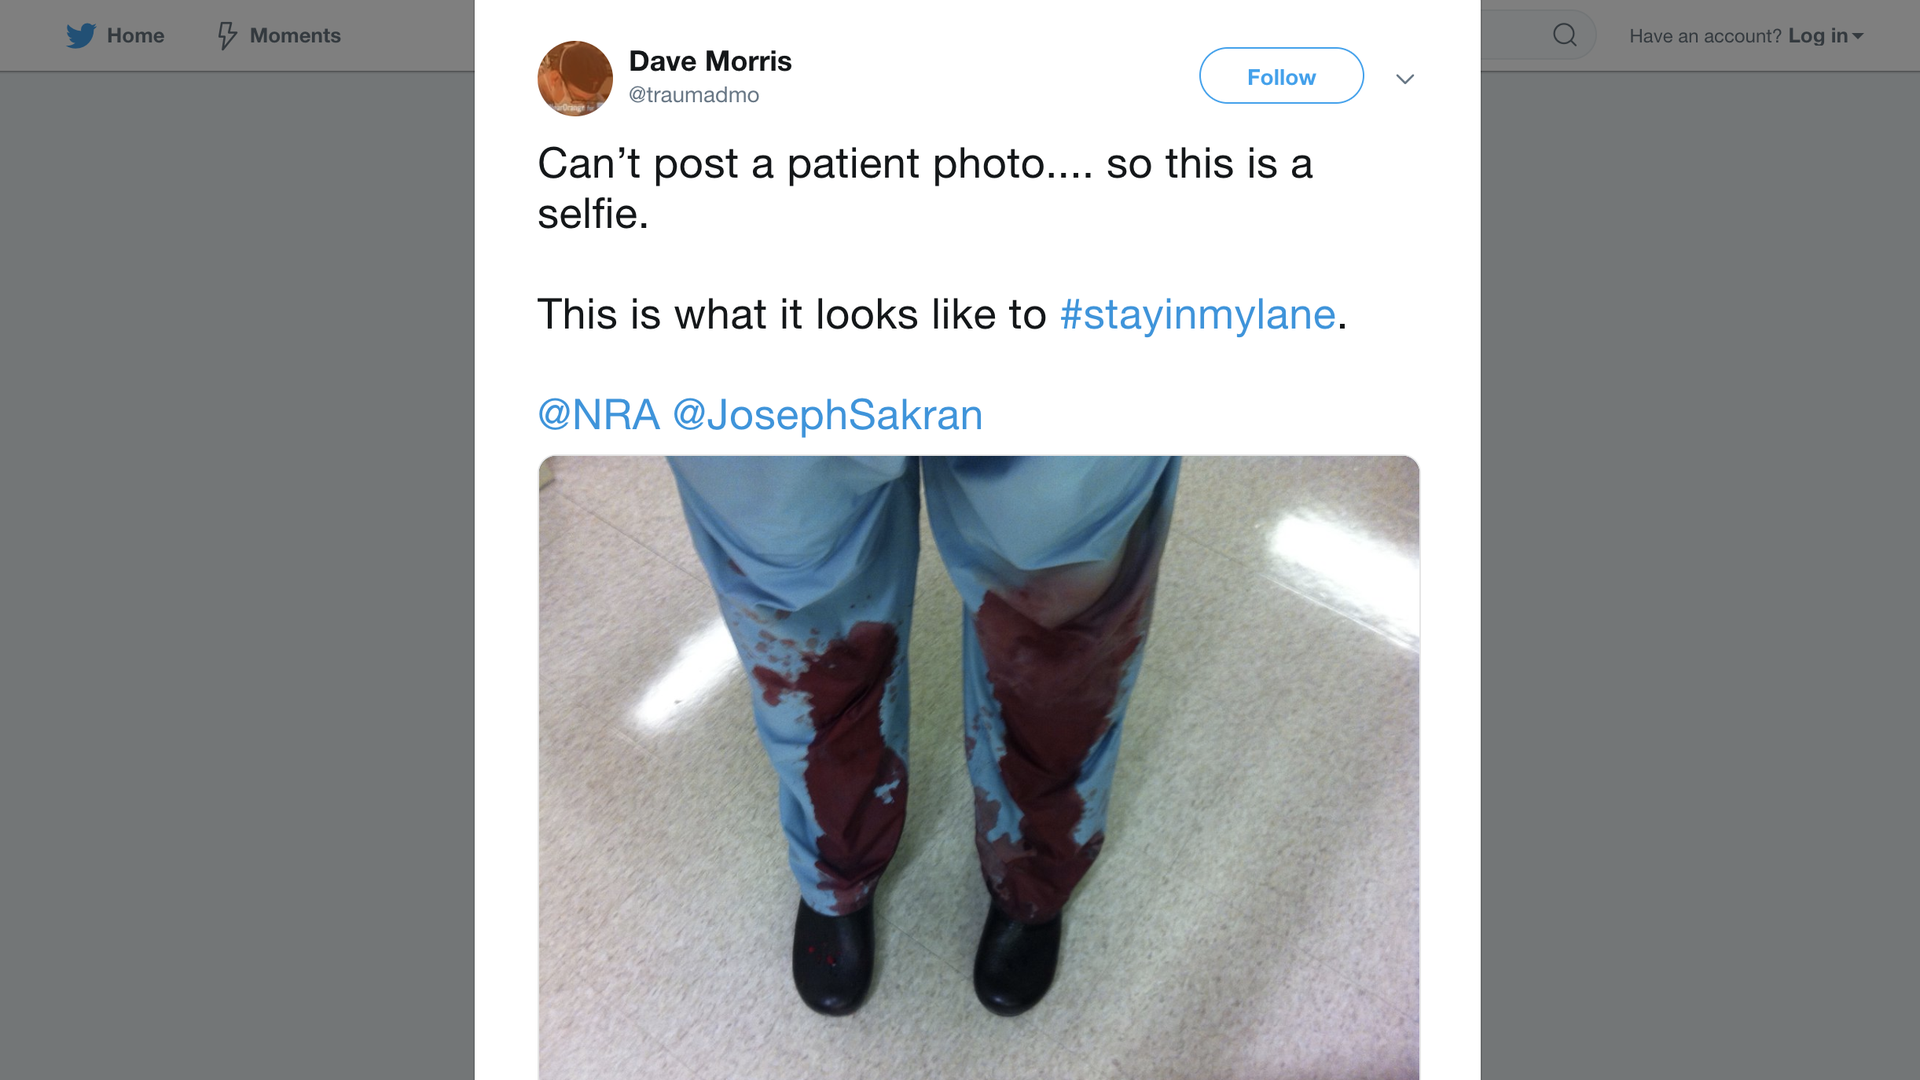 A photo of a doctor's legs with blood from a patient on them